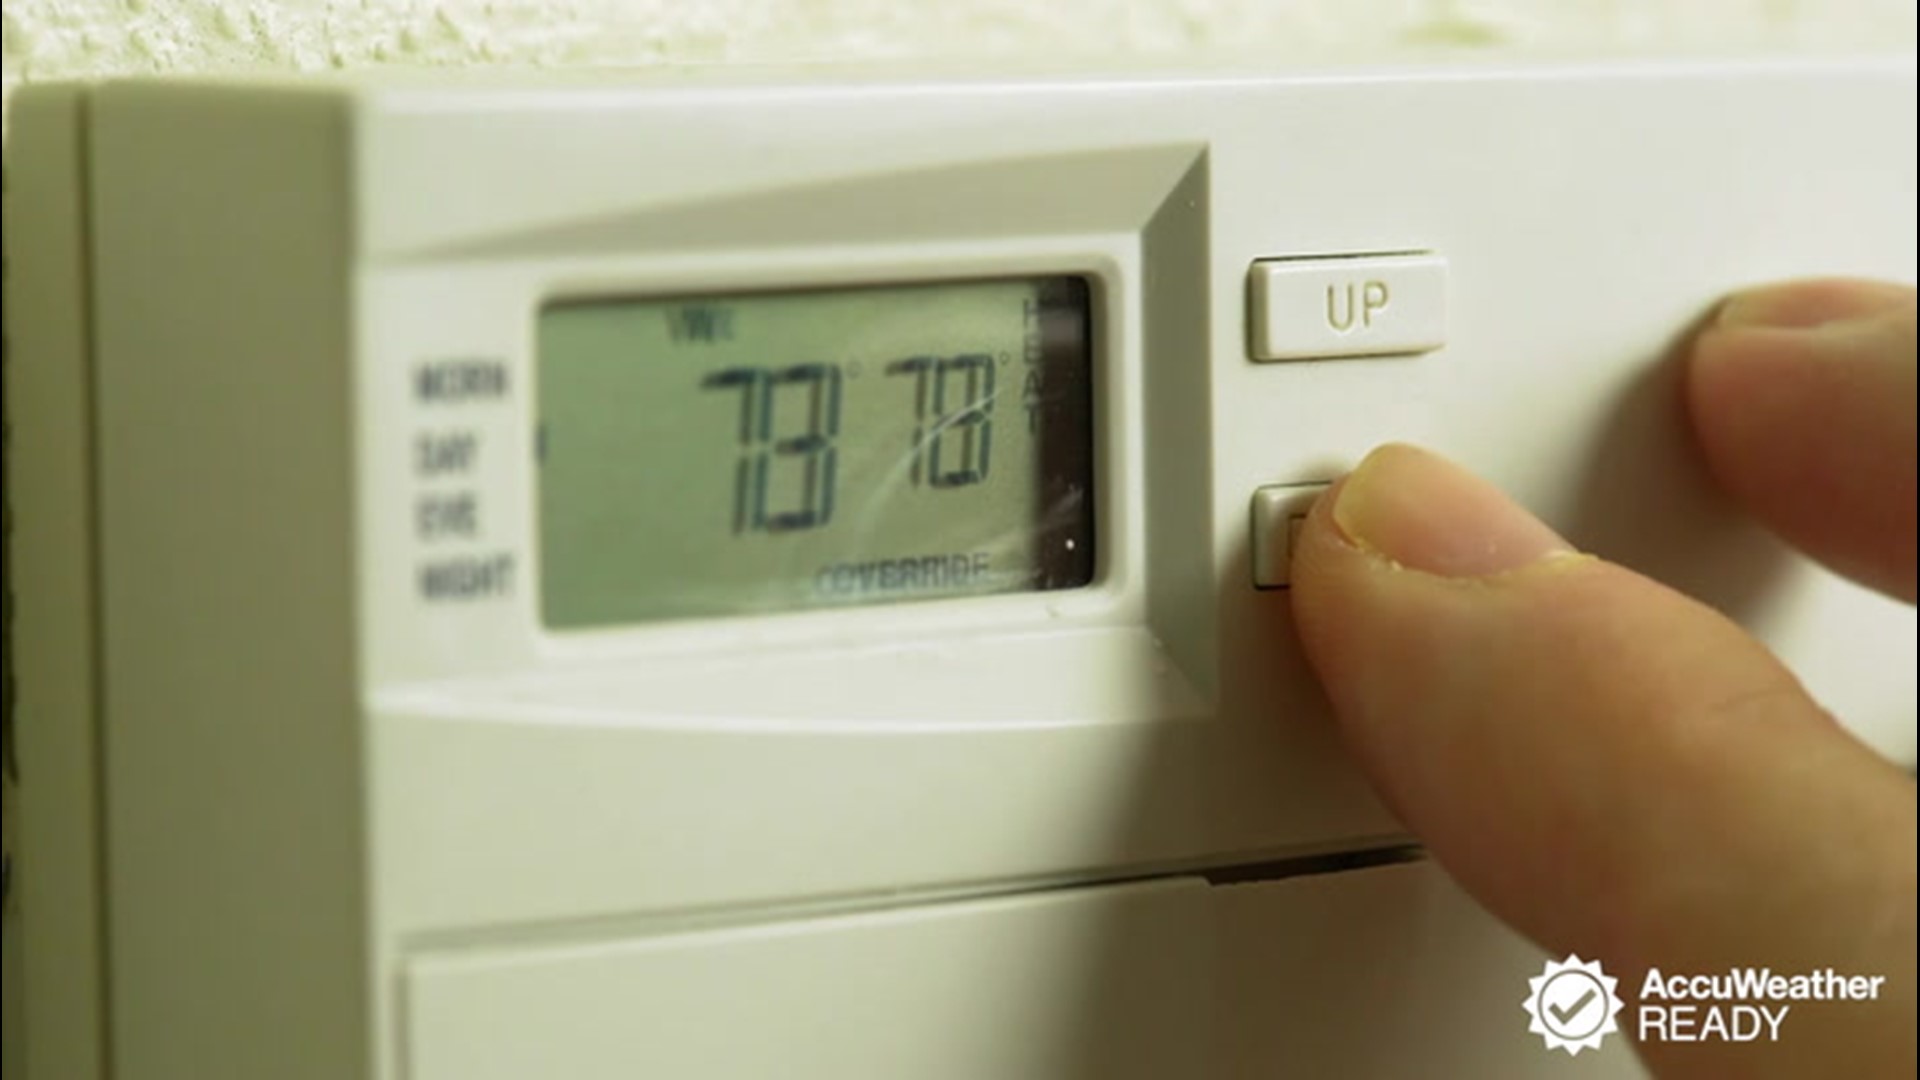 During the winter, people want to stay warm. They also don't want to pay too much on their heating bill. Here are some ways you can manage your heating bill.